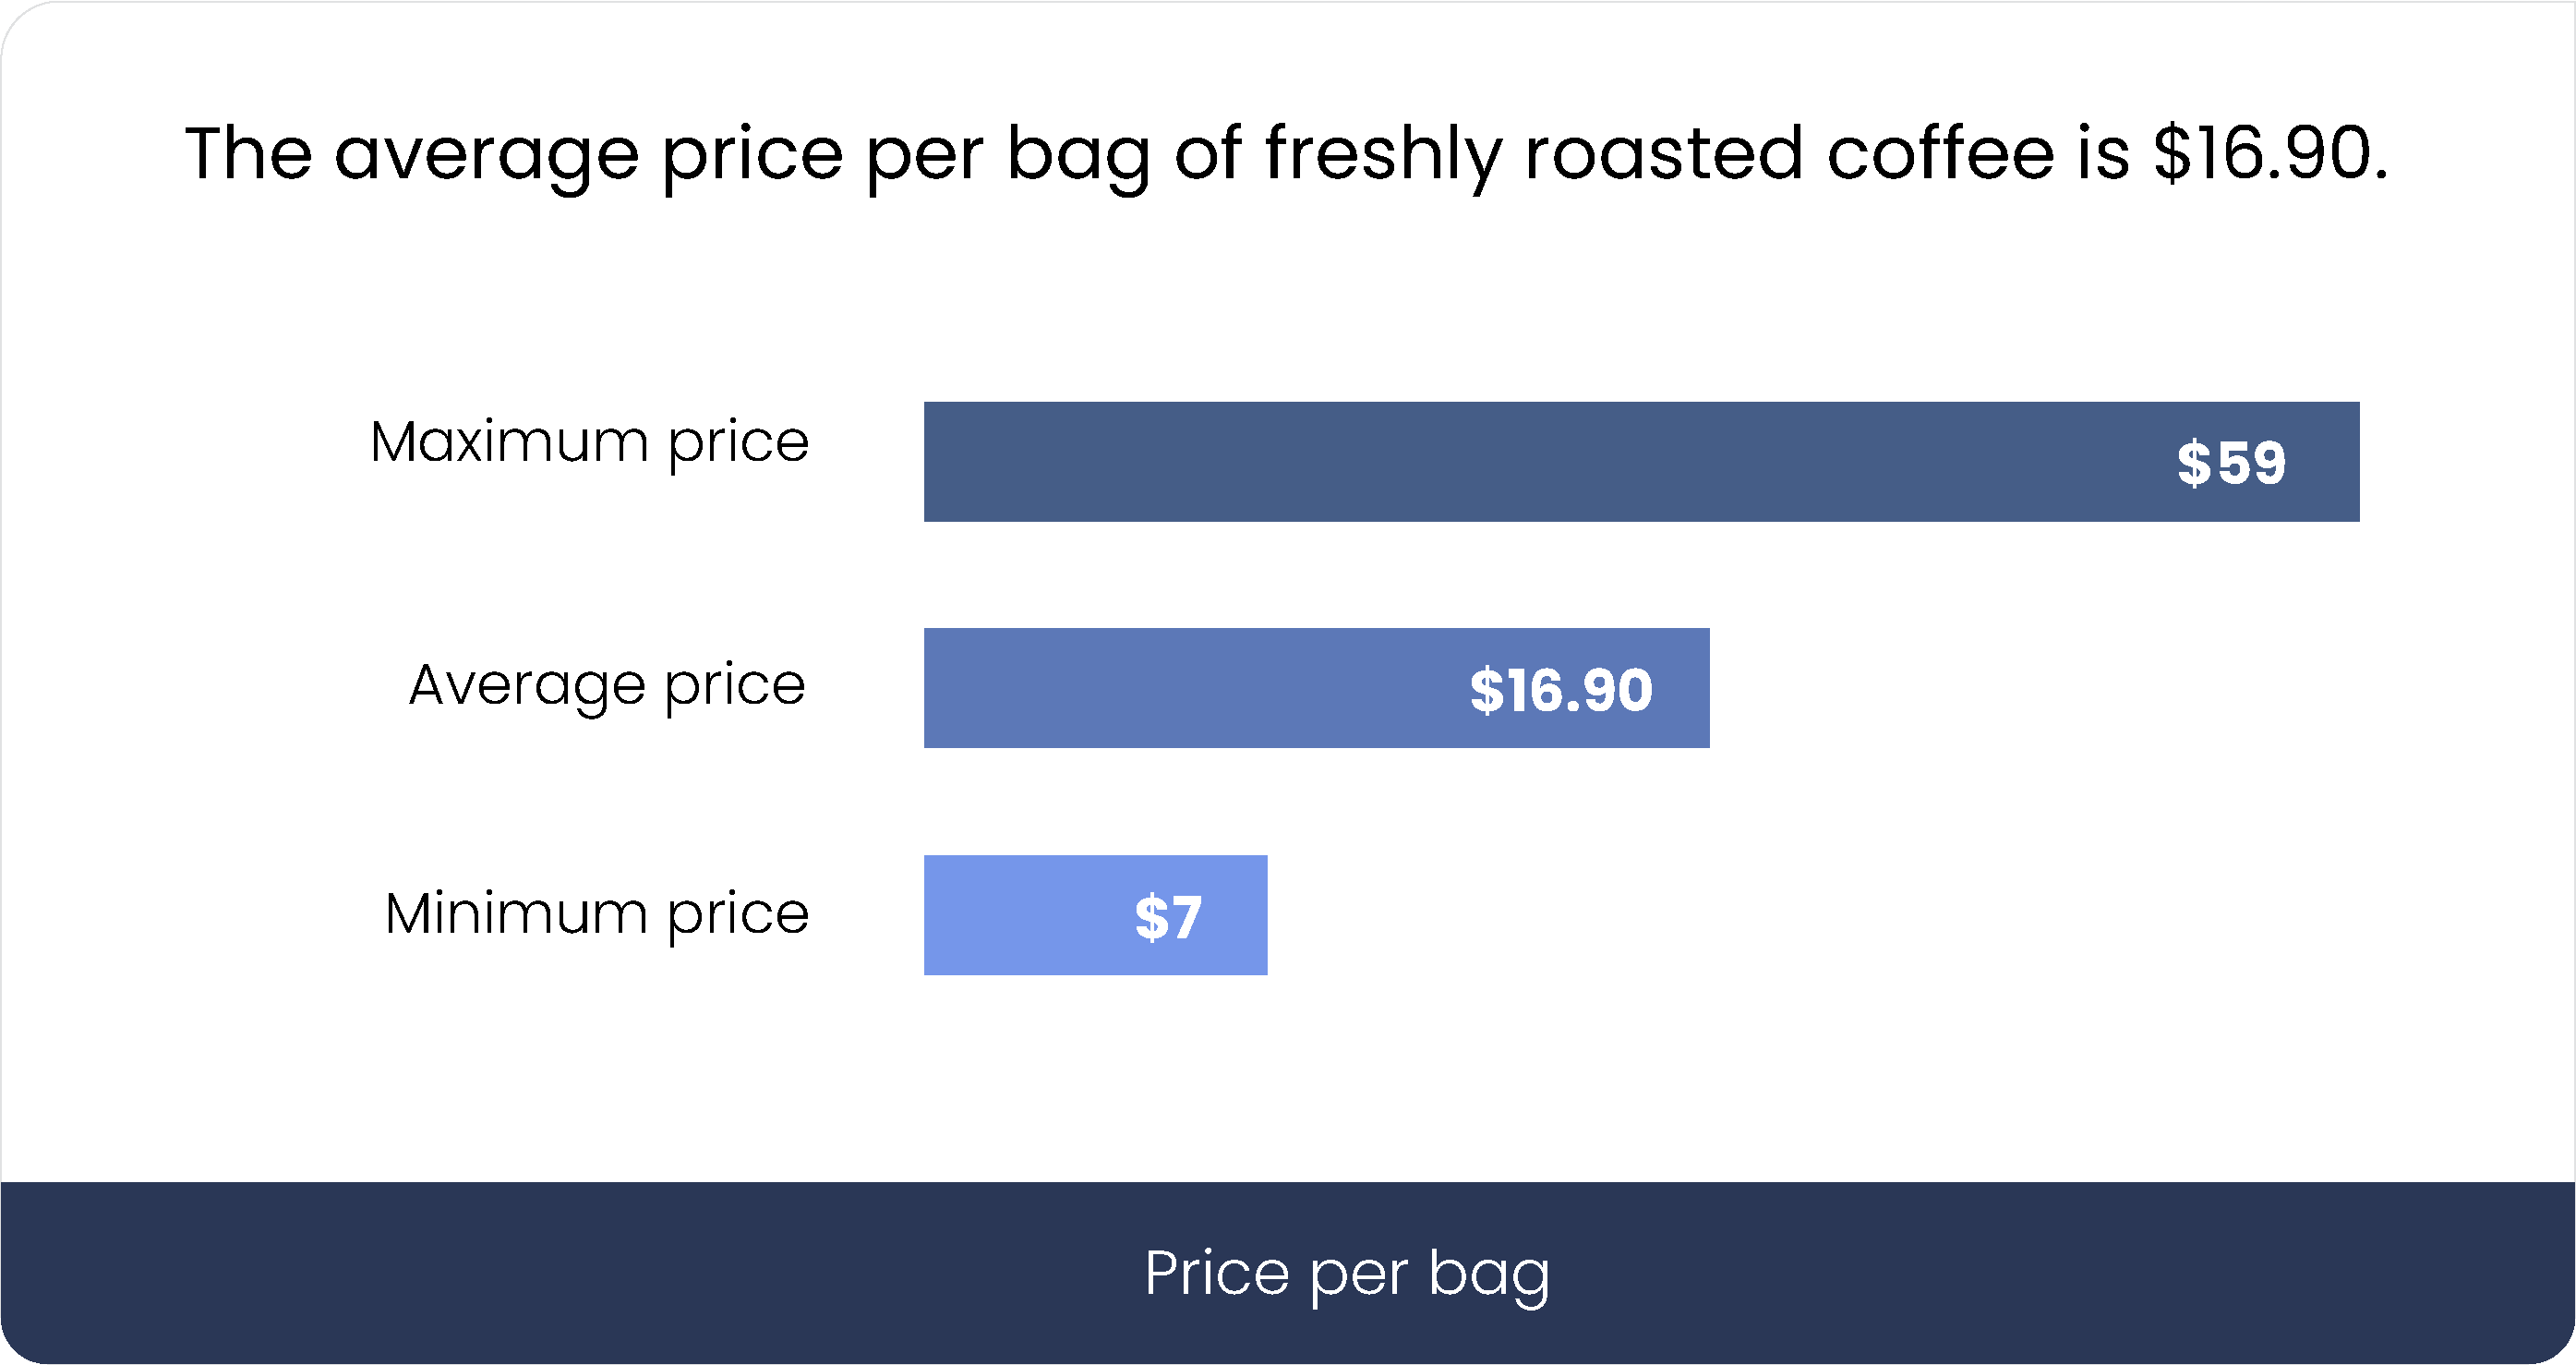 The average price per bag of freshly roasted coffee is $16.90